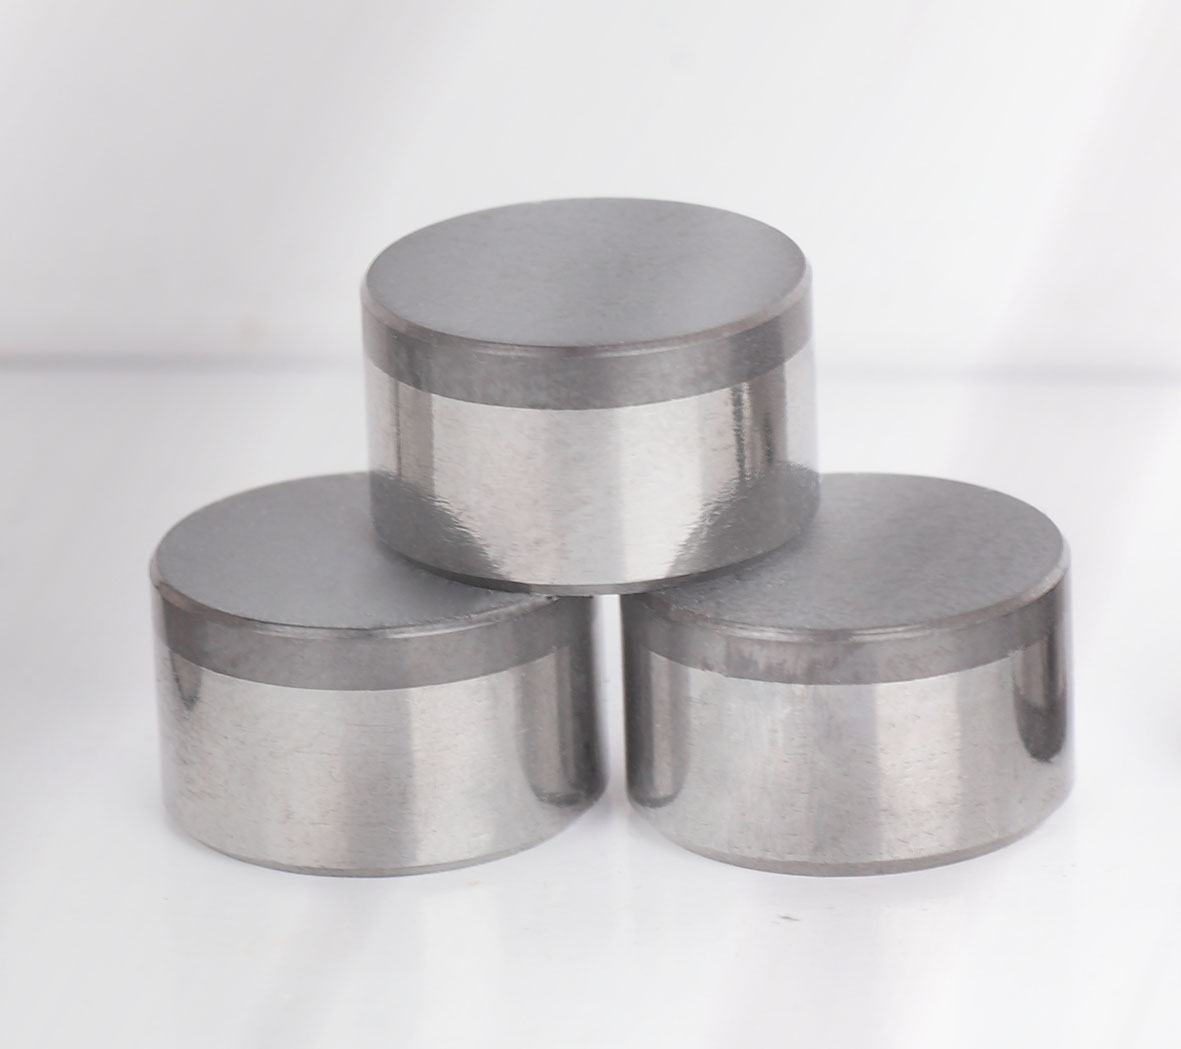 Diamond Fixed Cutter Bit Inserts - Polycrystalline diamond compact cutters Manufacturer Supplier Wholesale Exporter Importer Buyer Trader Retailer in quanzhou Kerala China